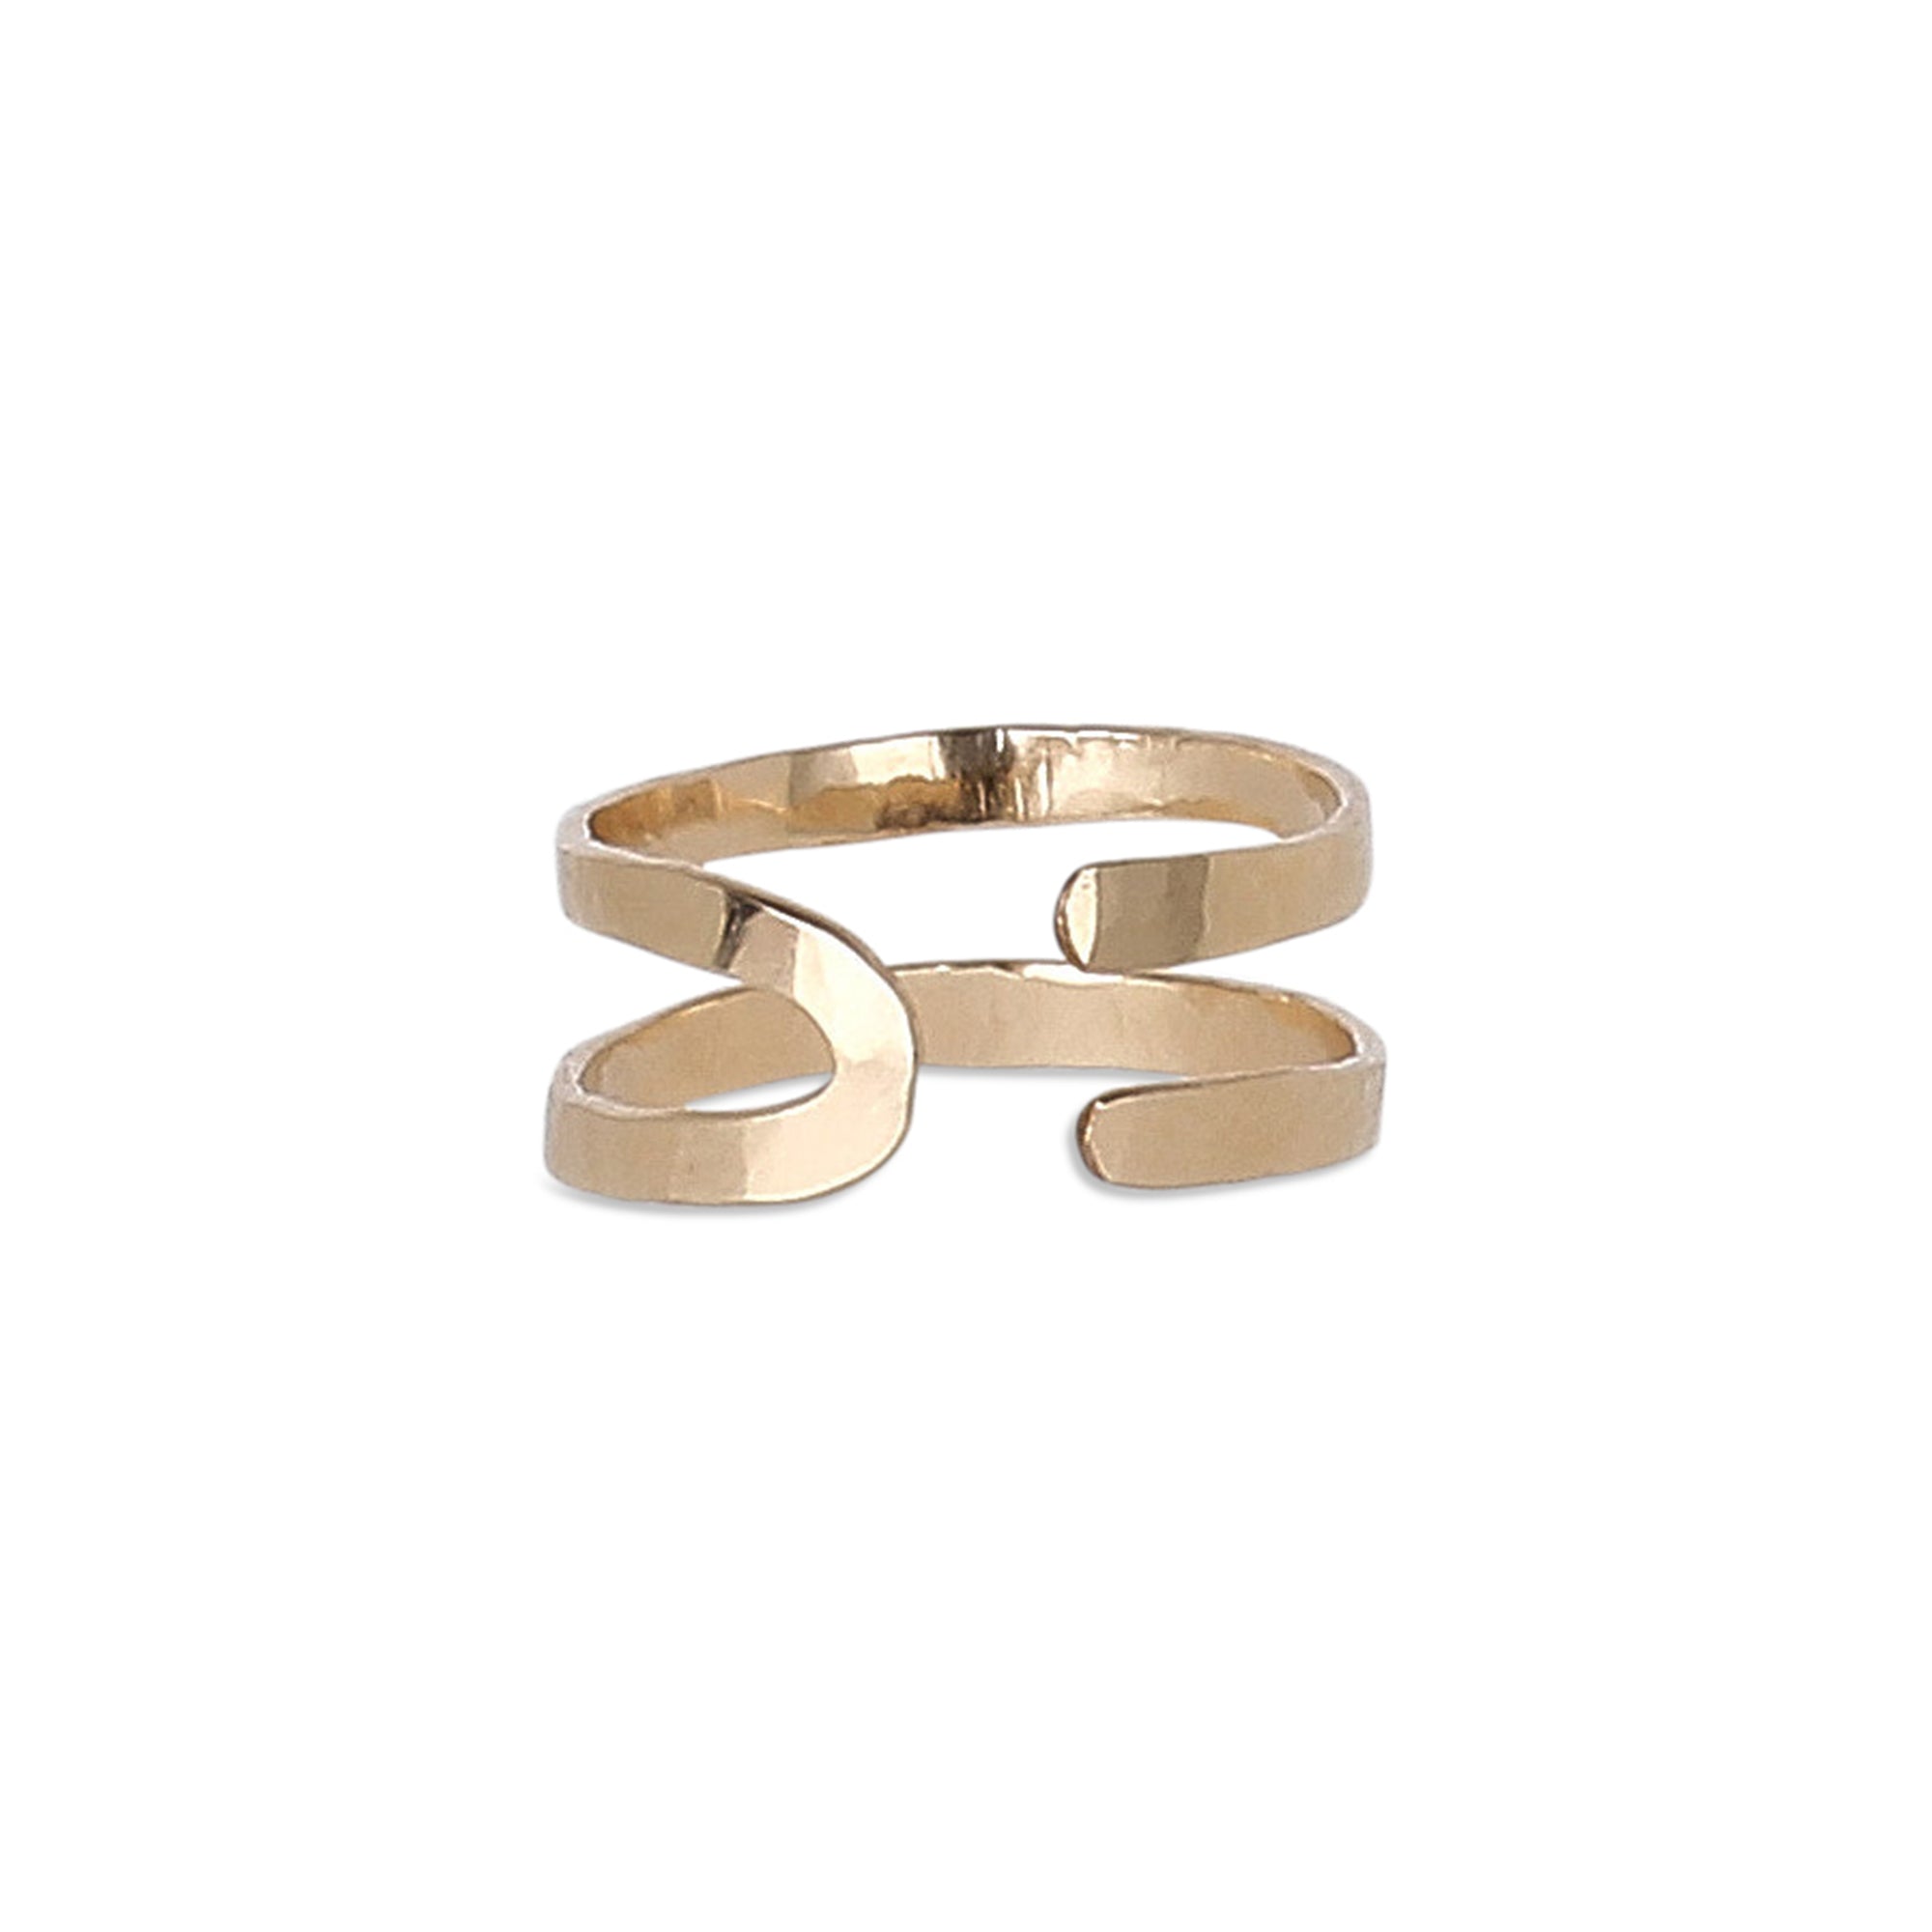 With a sleek, modern, and sculptural design, the hand-forged Joan Ring has a distinctive, minimal presence.